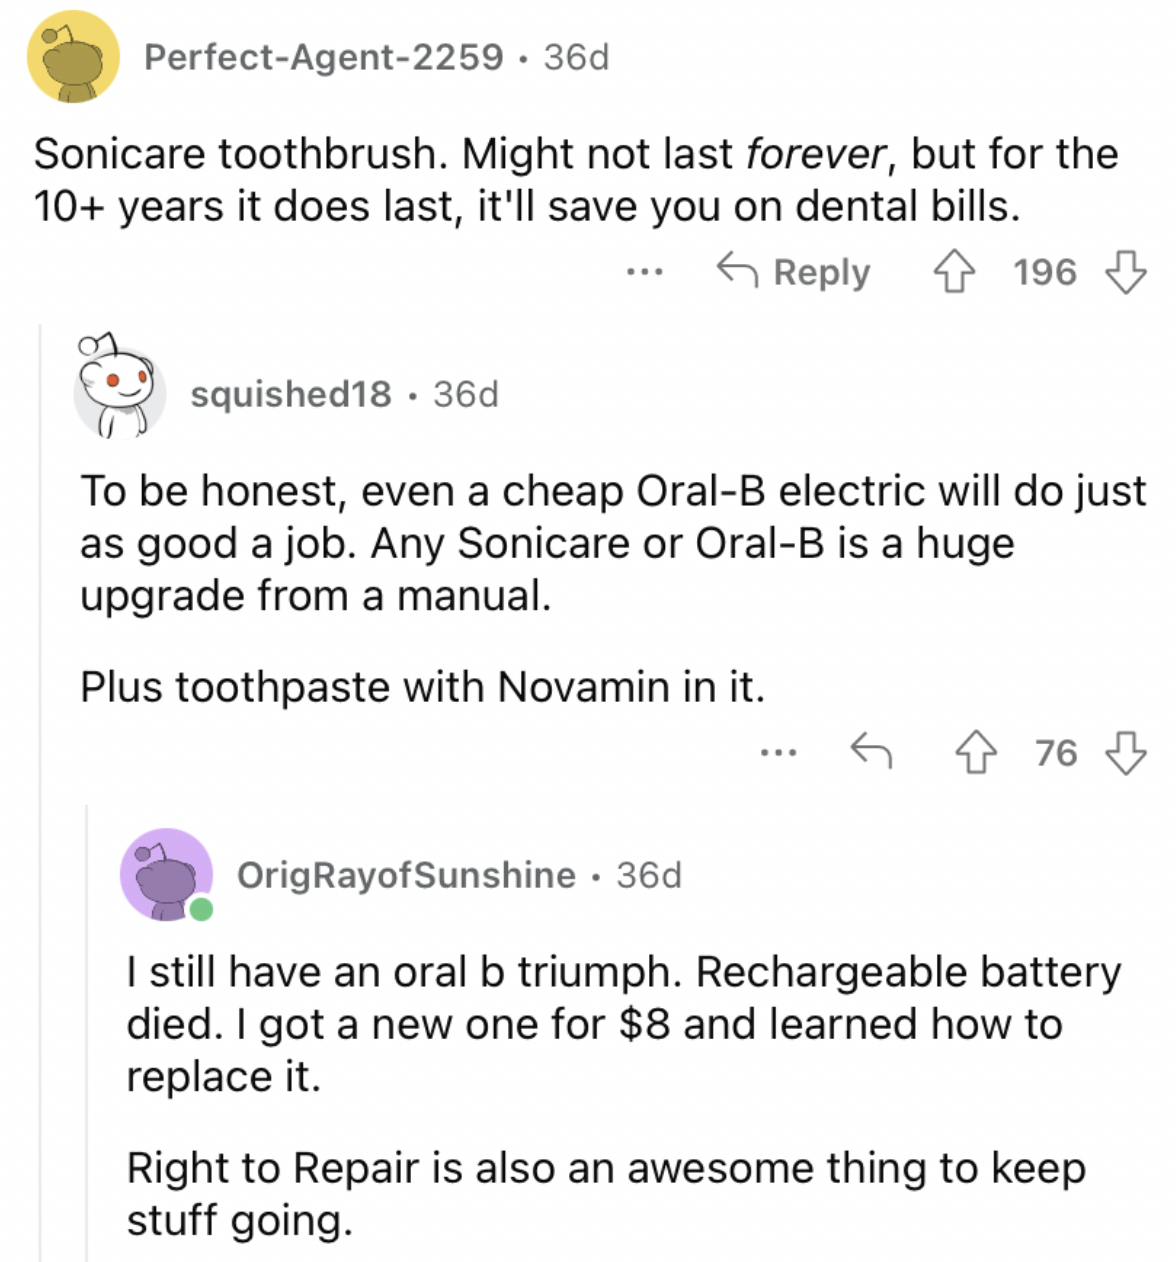 Reddit screenshot about the value of a Sonicare toothbrush.